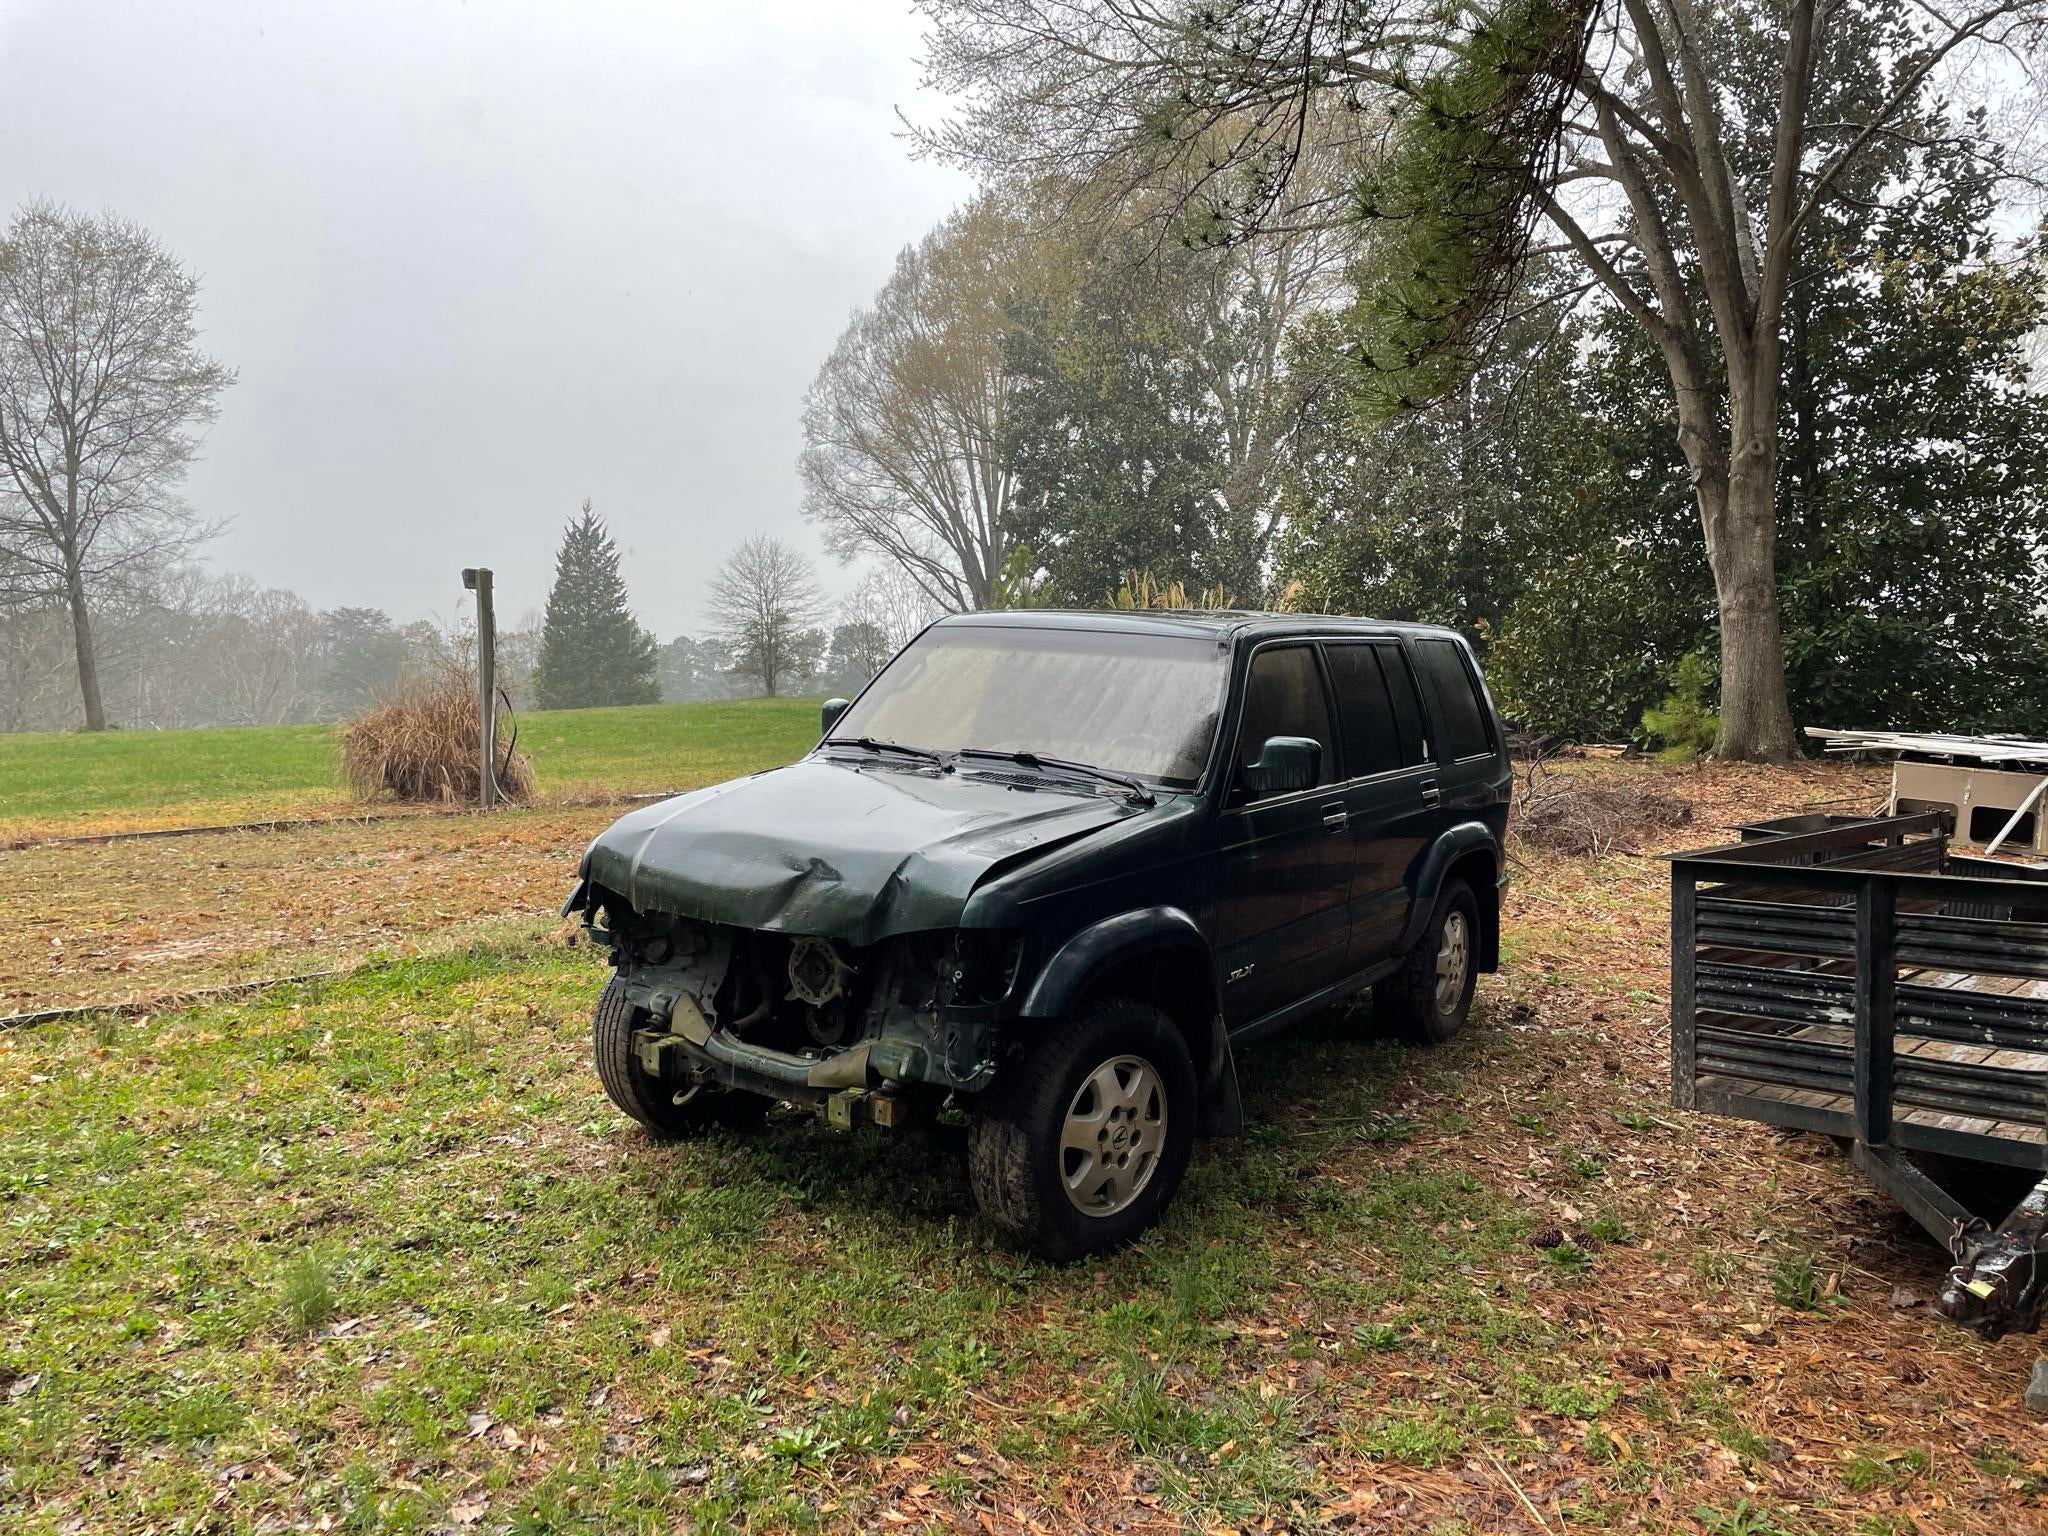 1999 Acura SLX - What Can I Do With A Wrecked Car? : r/Acura